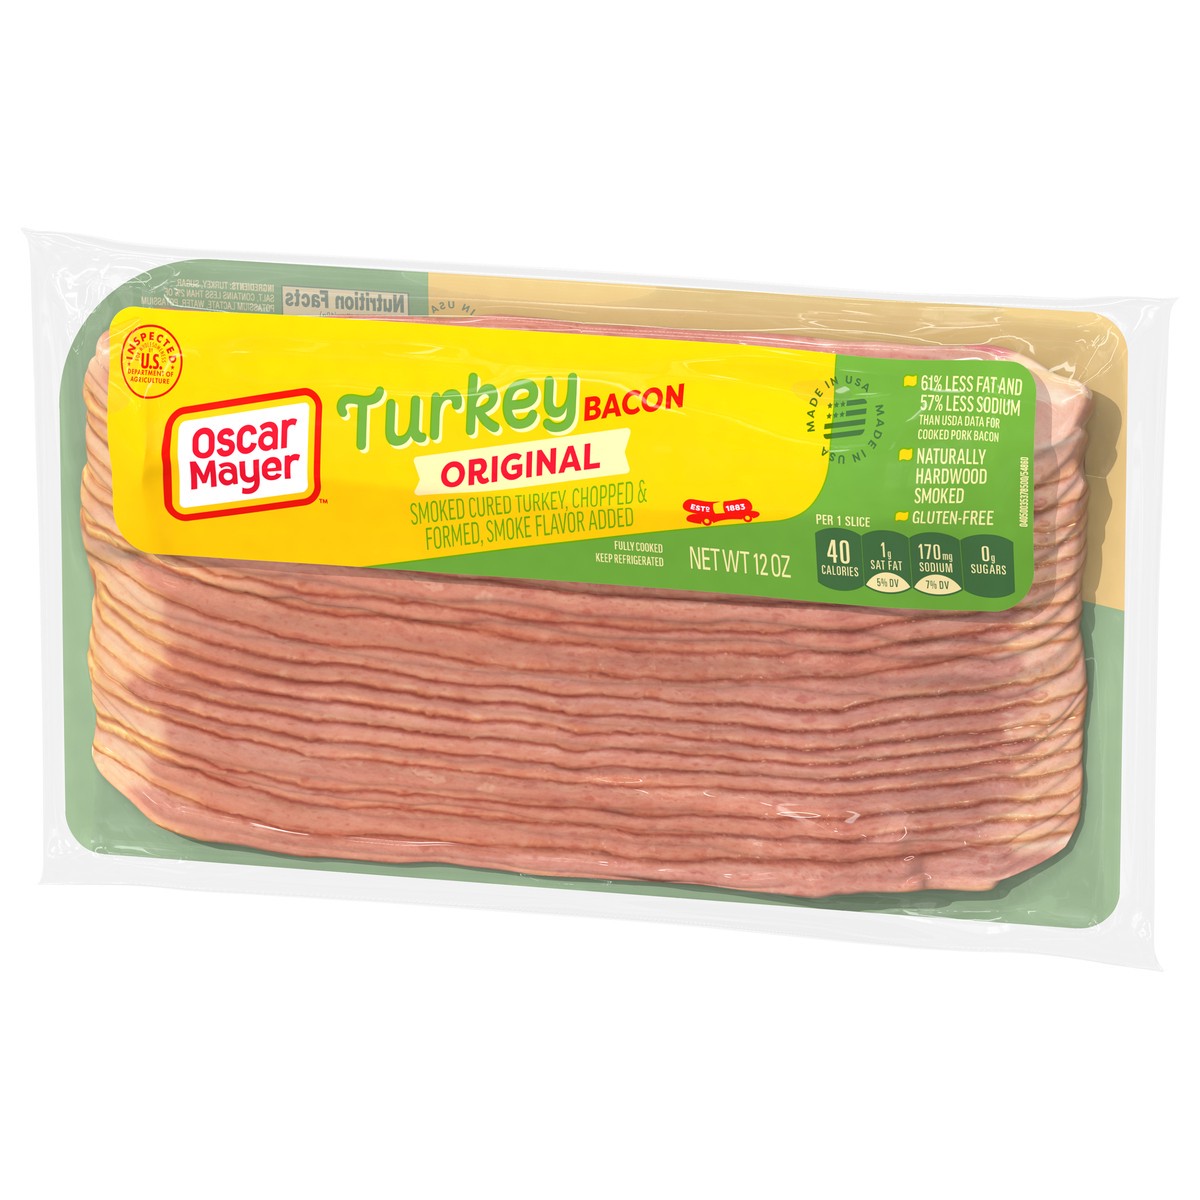 slide 5 of 9, Oscar Mayer Gluten Free Turkey Bacon with 58% Less Fat & 57% Less Sodium, 12 oz Pack, 21-23 slices, 12 oz